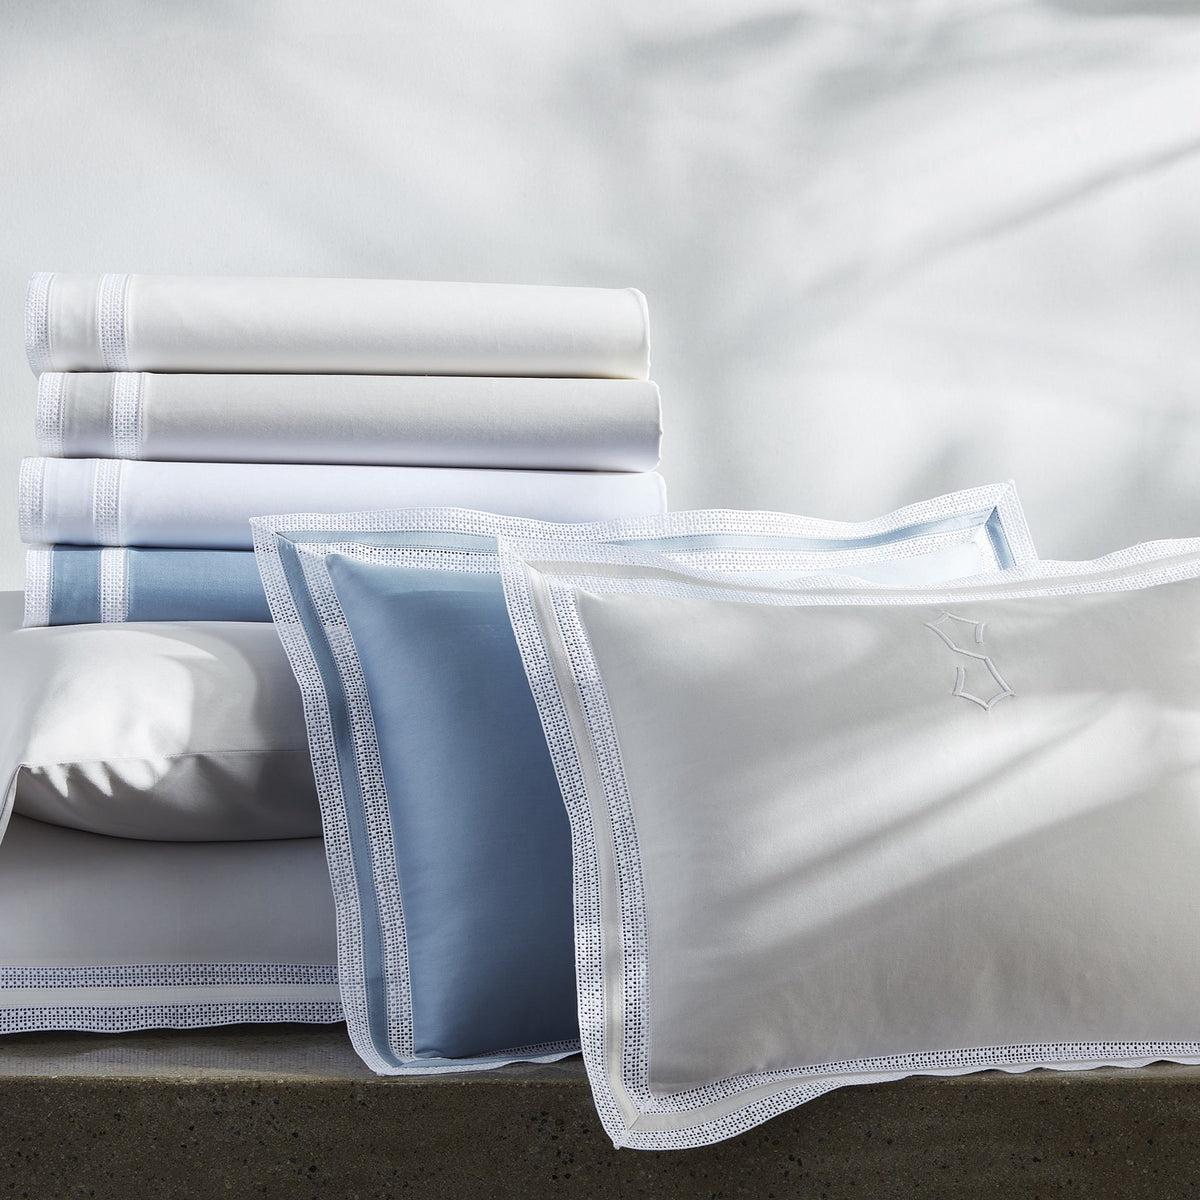 Matouk Grace Bedding Sham and Sheets in Different Colors